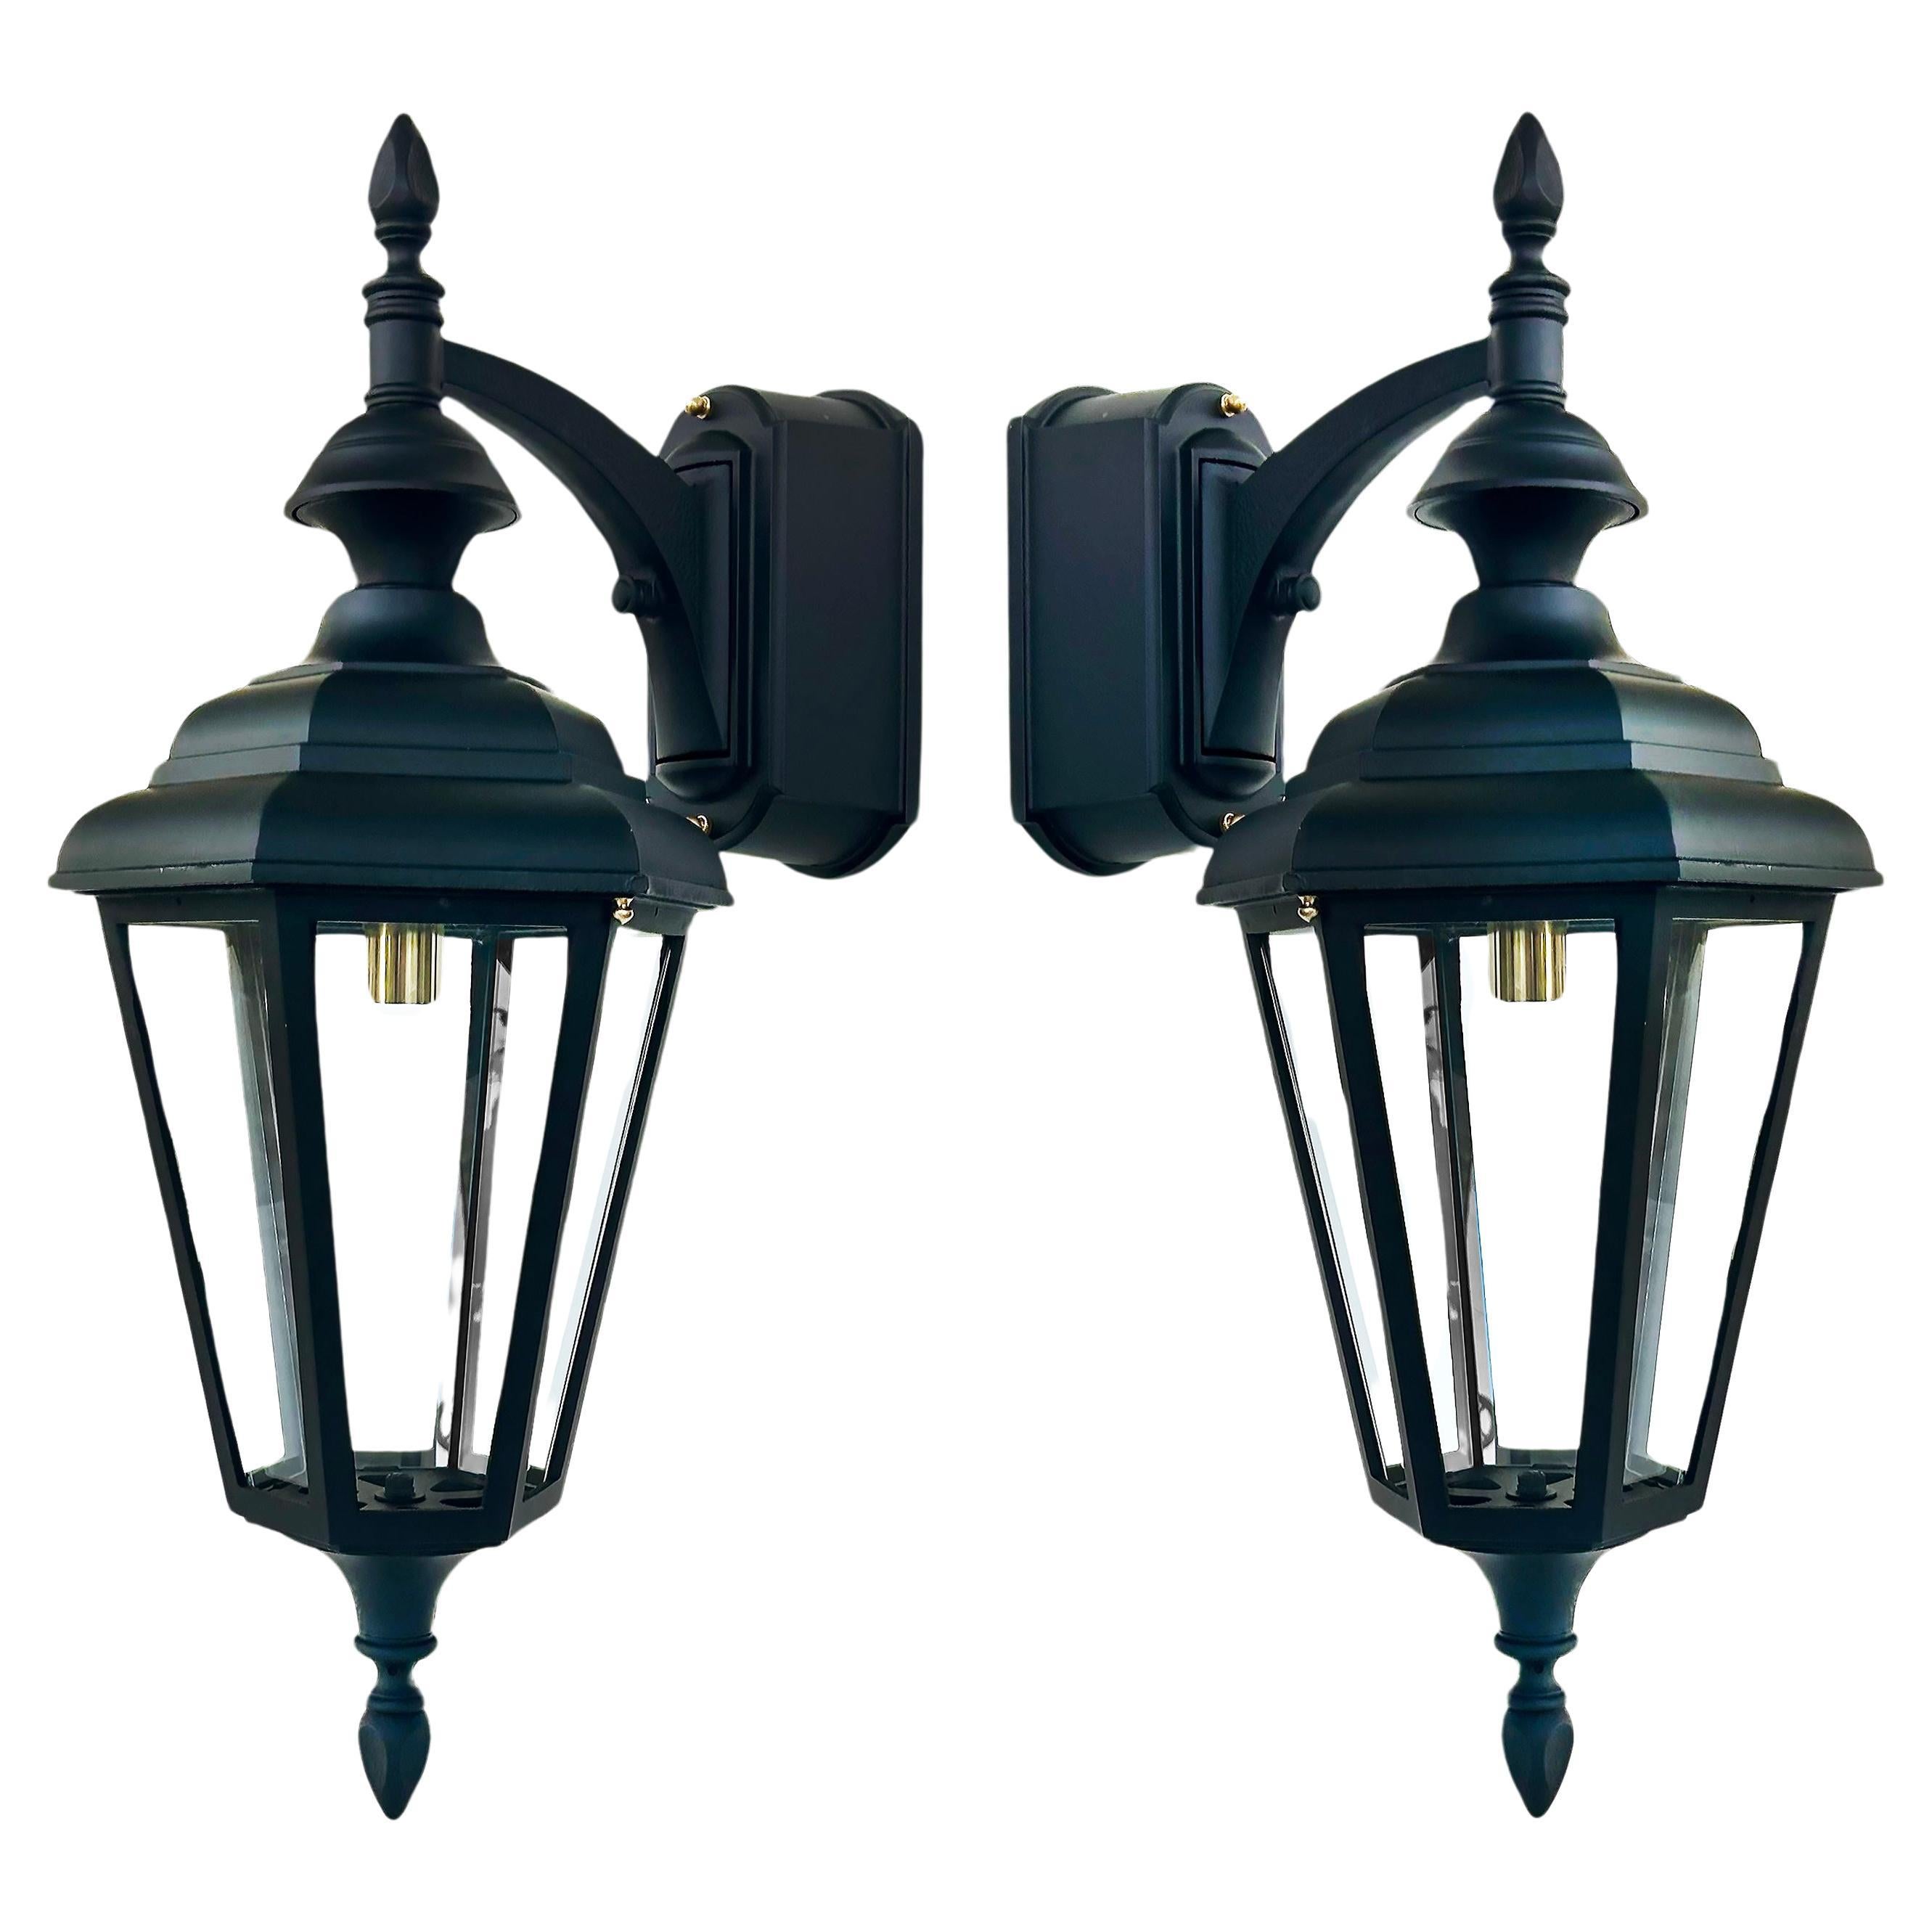 Exterior Pair of Lantern Wall Sconces Completely Restored with Porcelain Sockets